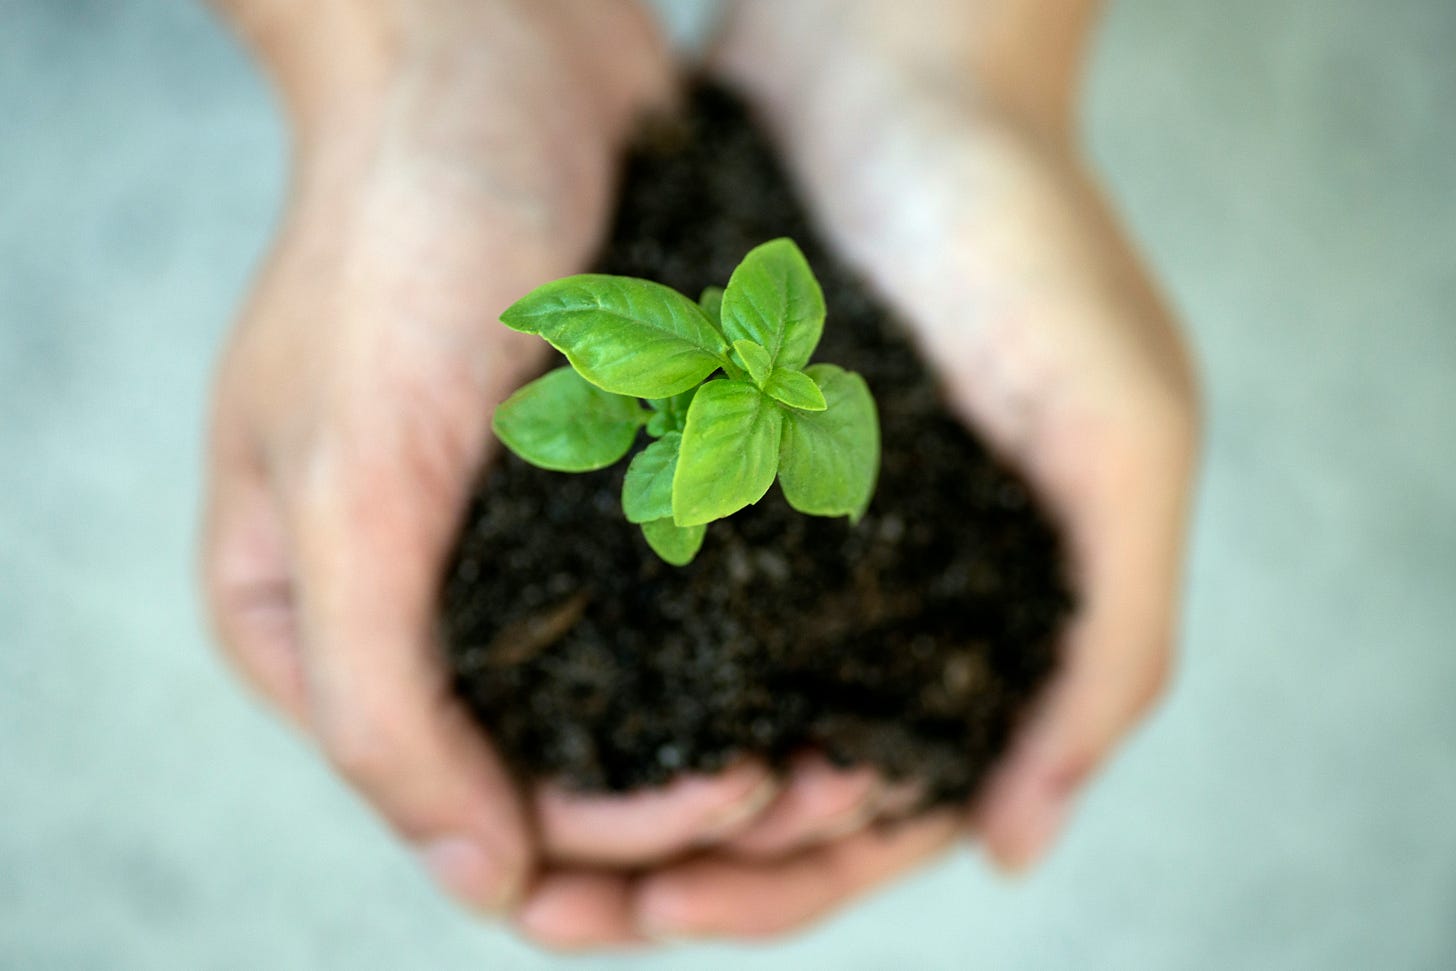 An image of hands holding a sapling, still in the dirt in which it was planted